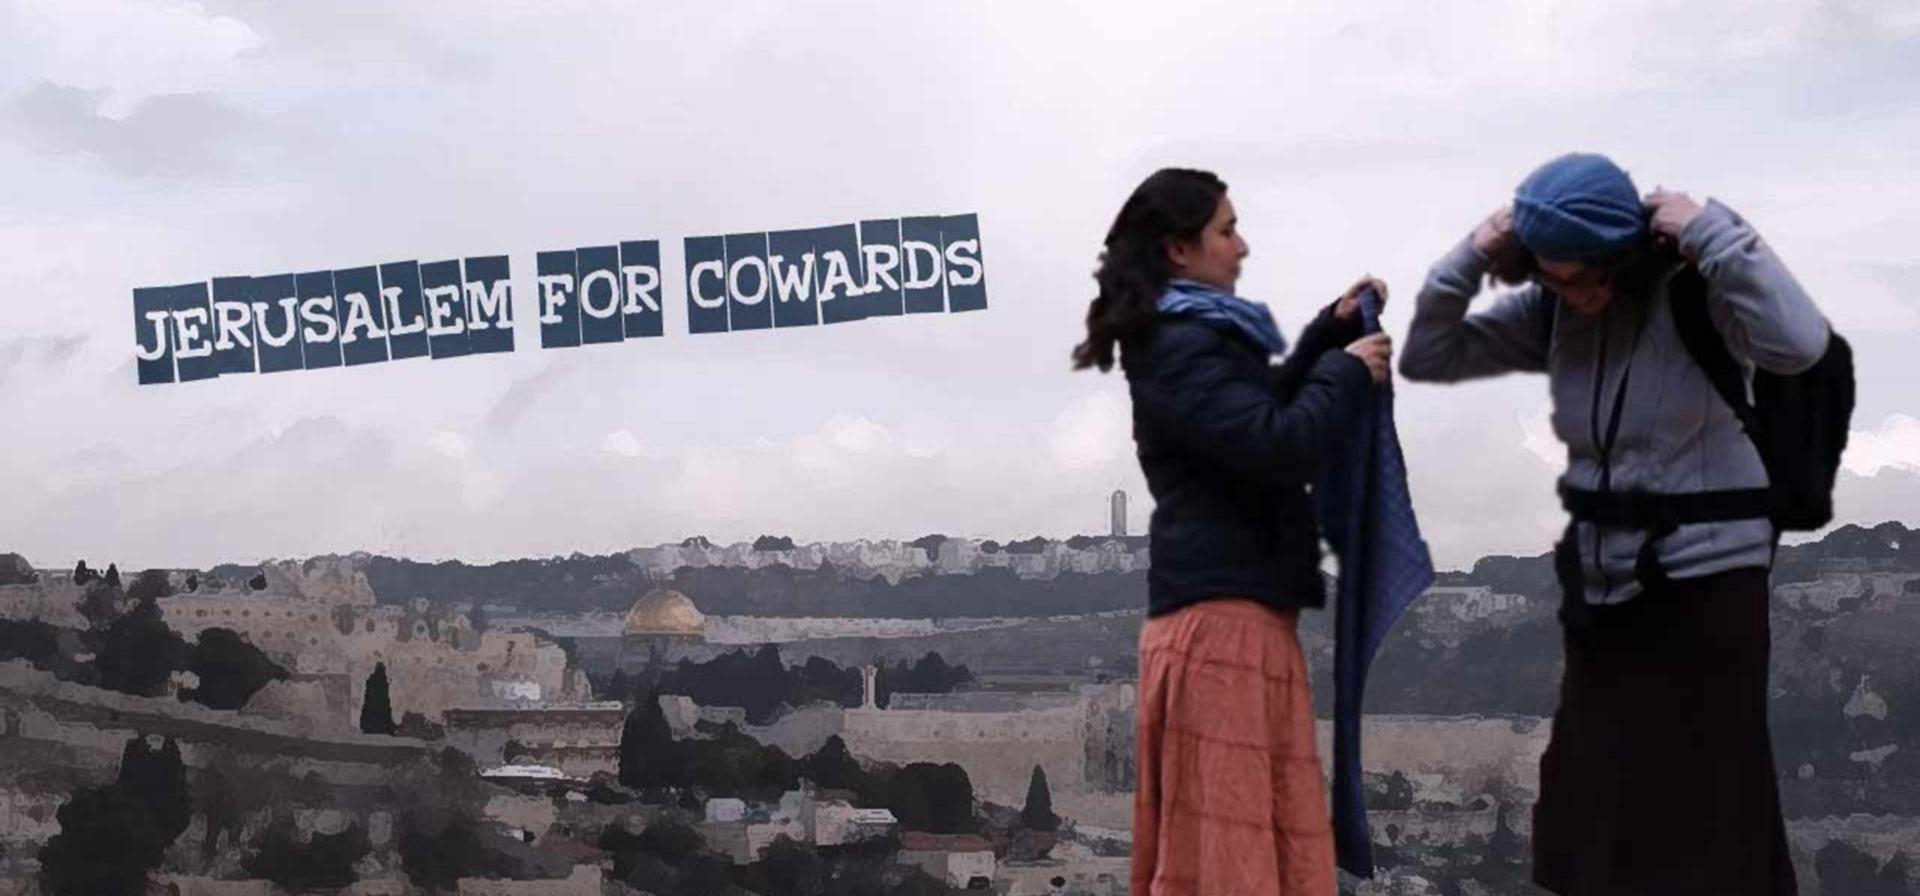 Two women about to cover their hair with a headscarf. In the background you can see Jerusalem and the writing “Jerusalem for corwards”.